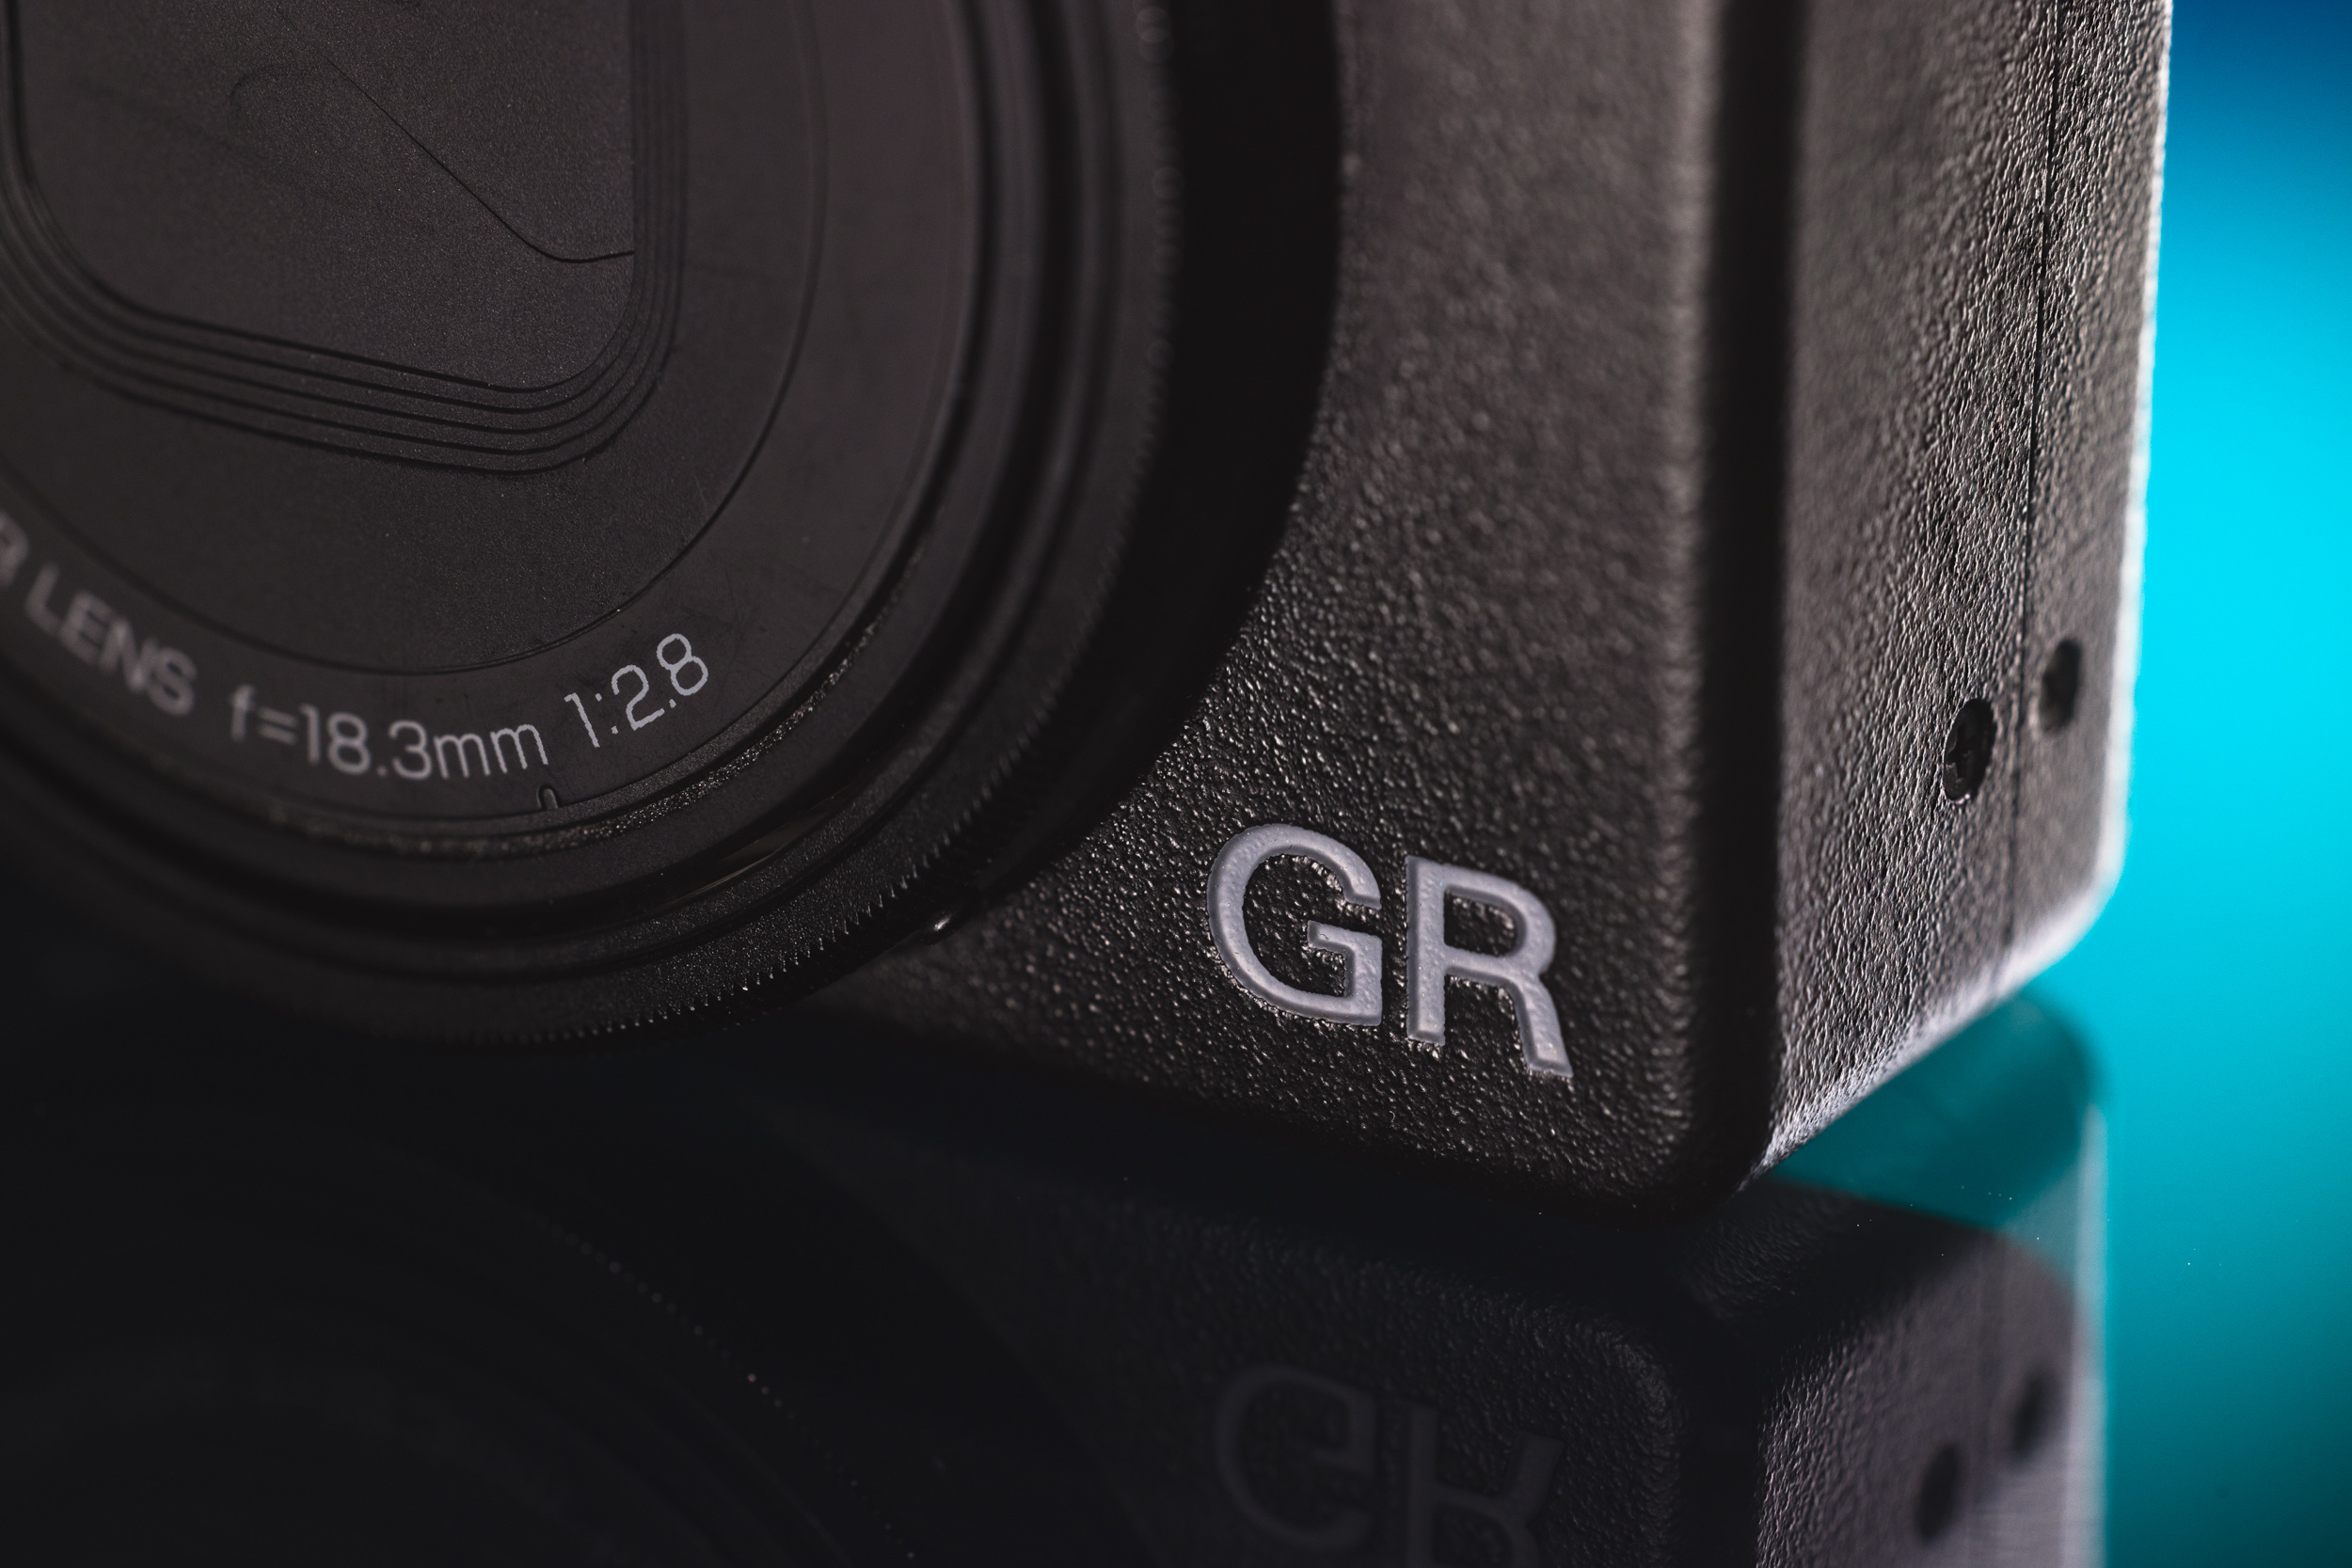 Ricoh GR III review: Digital Photography Review